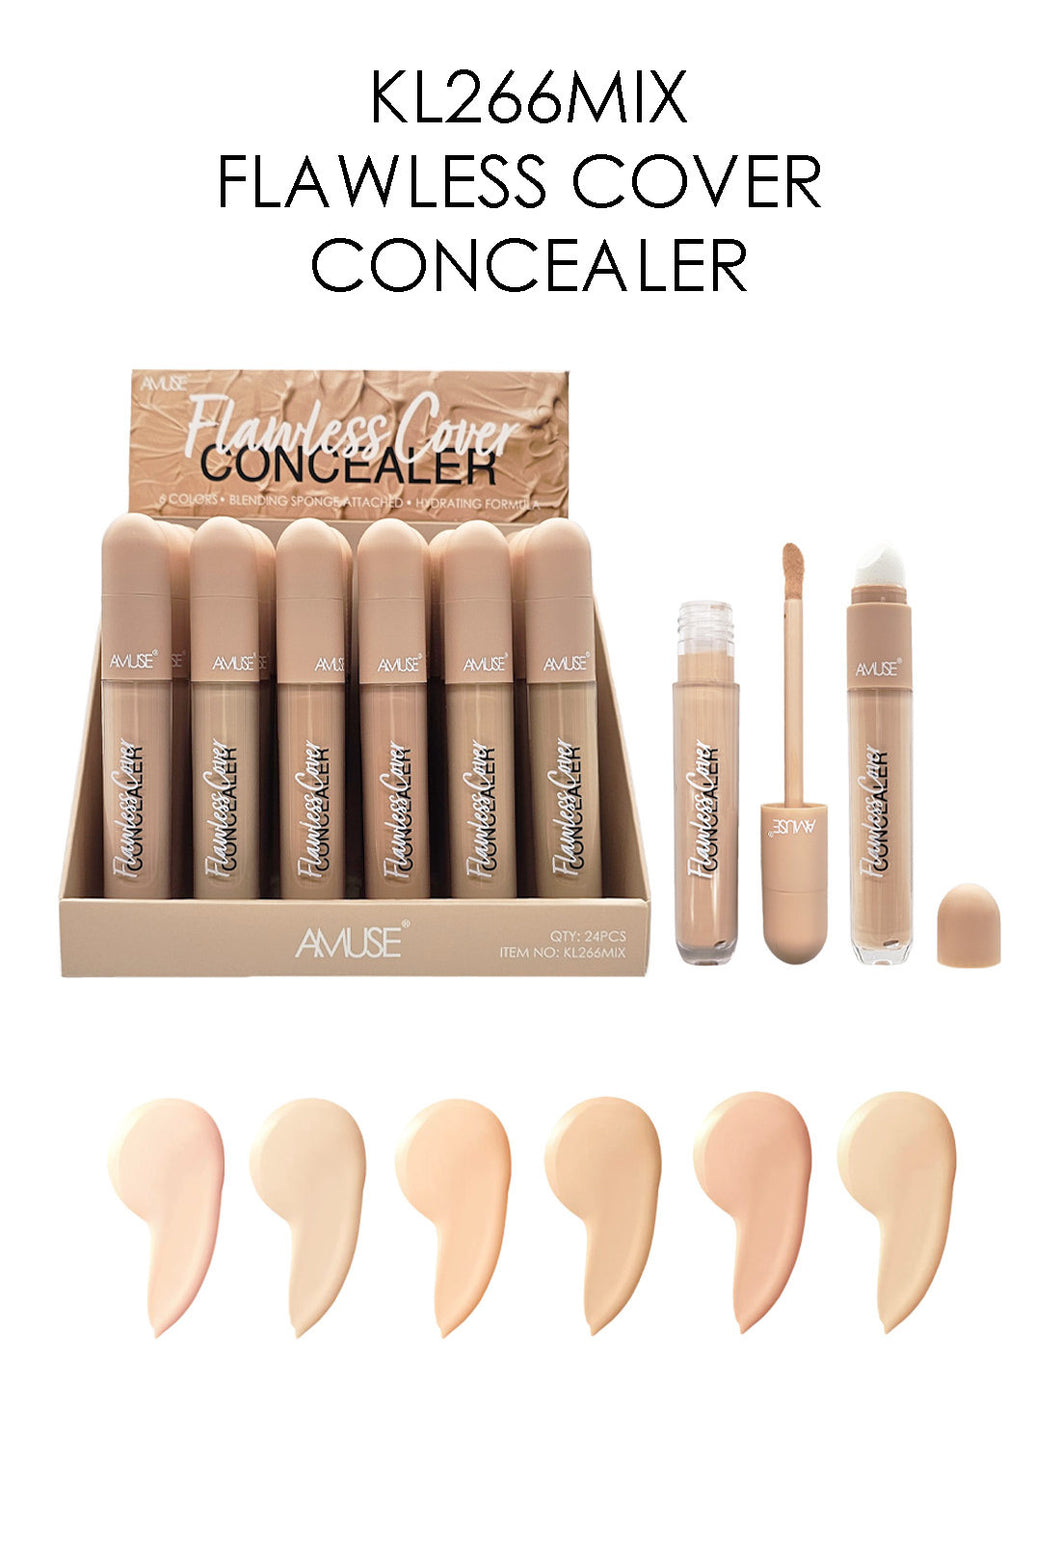 KL266MIX FLAWLESS COVER CONCEALER